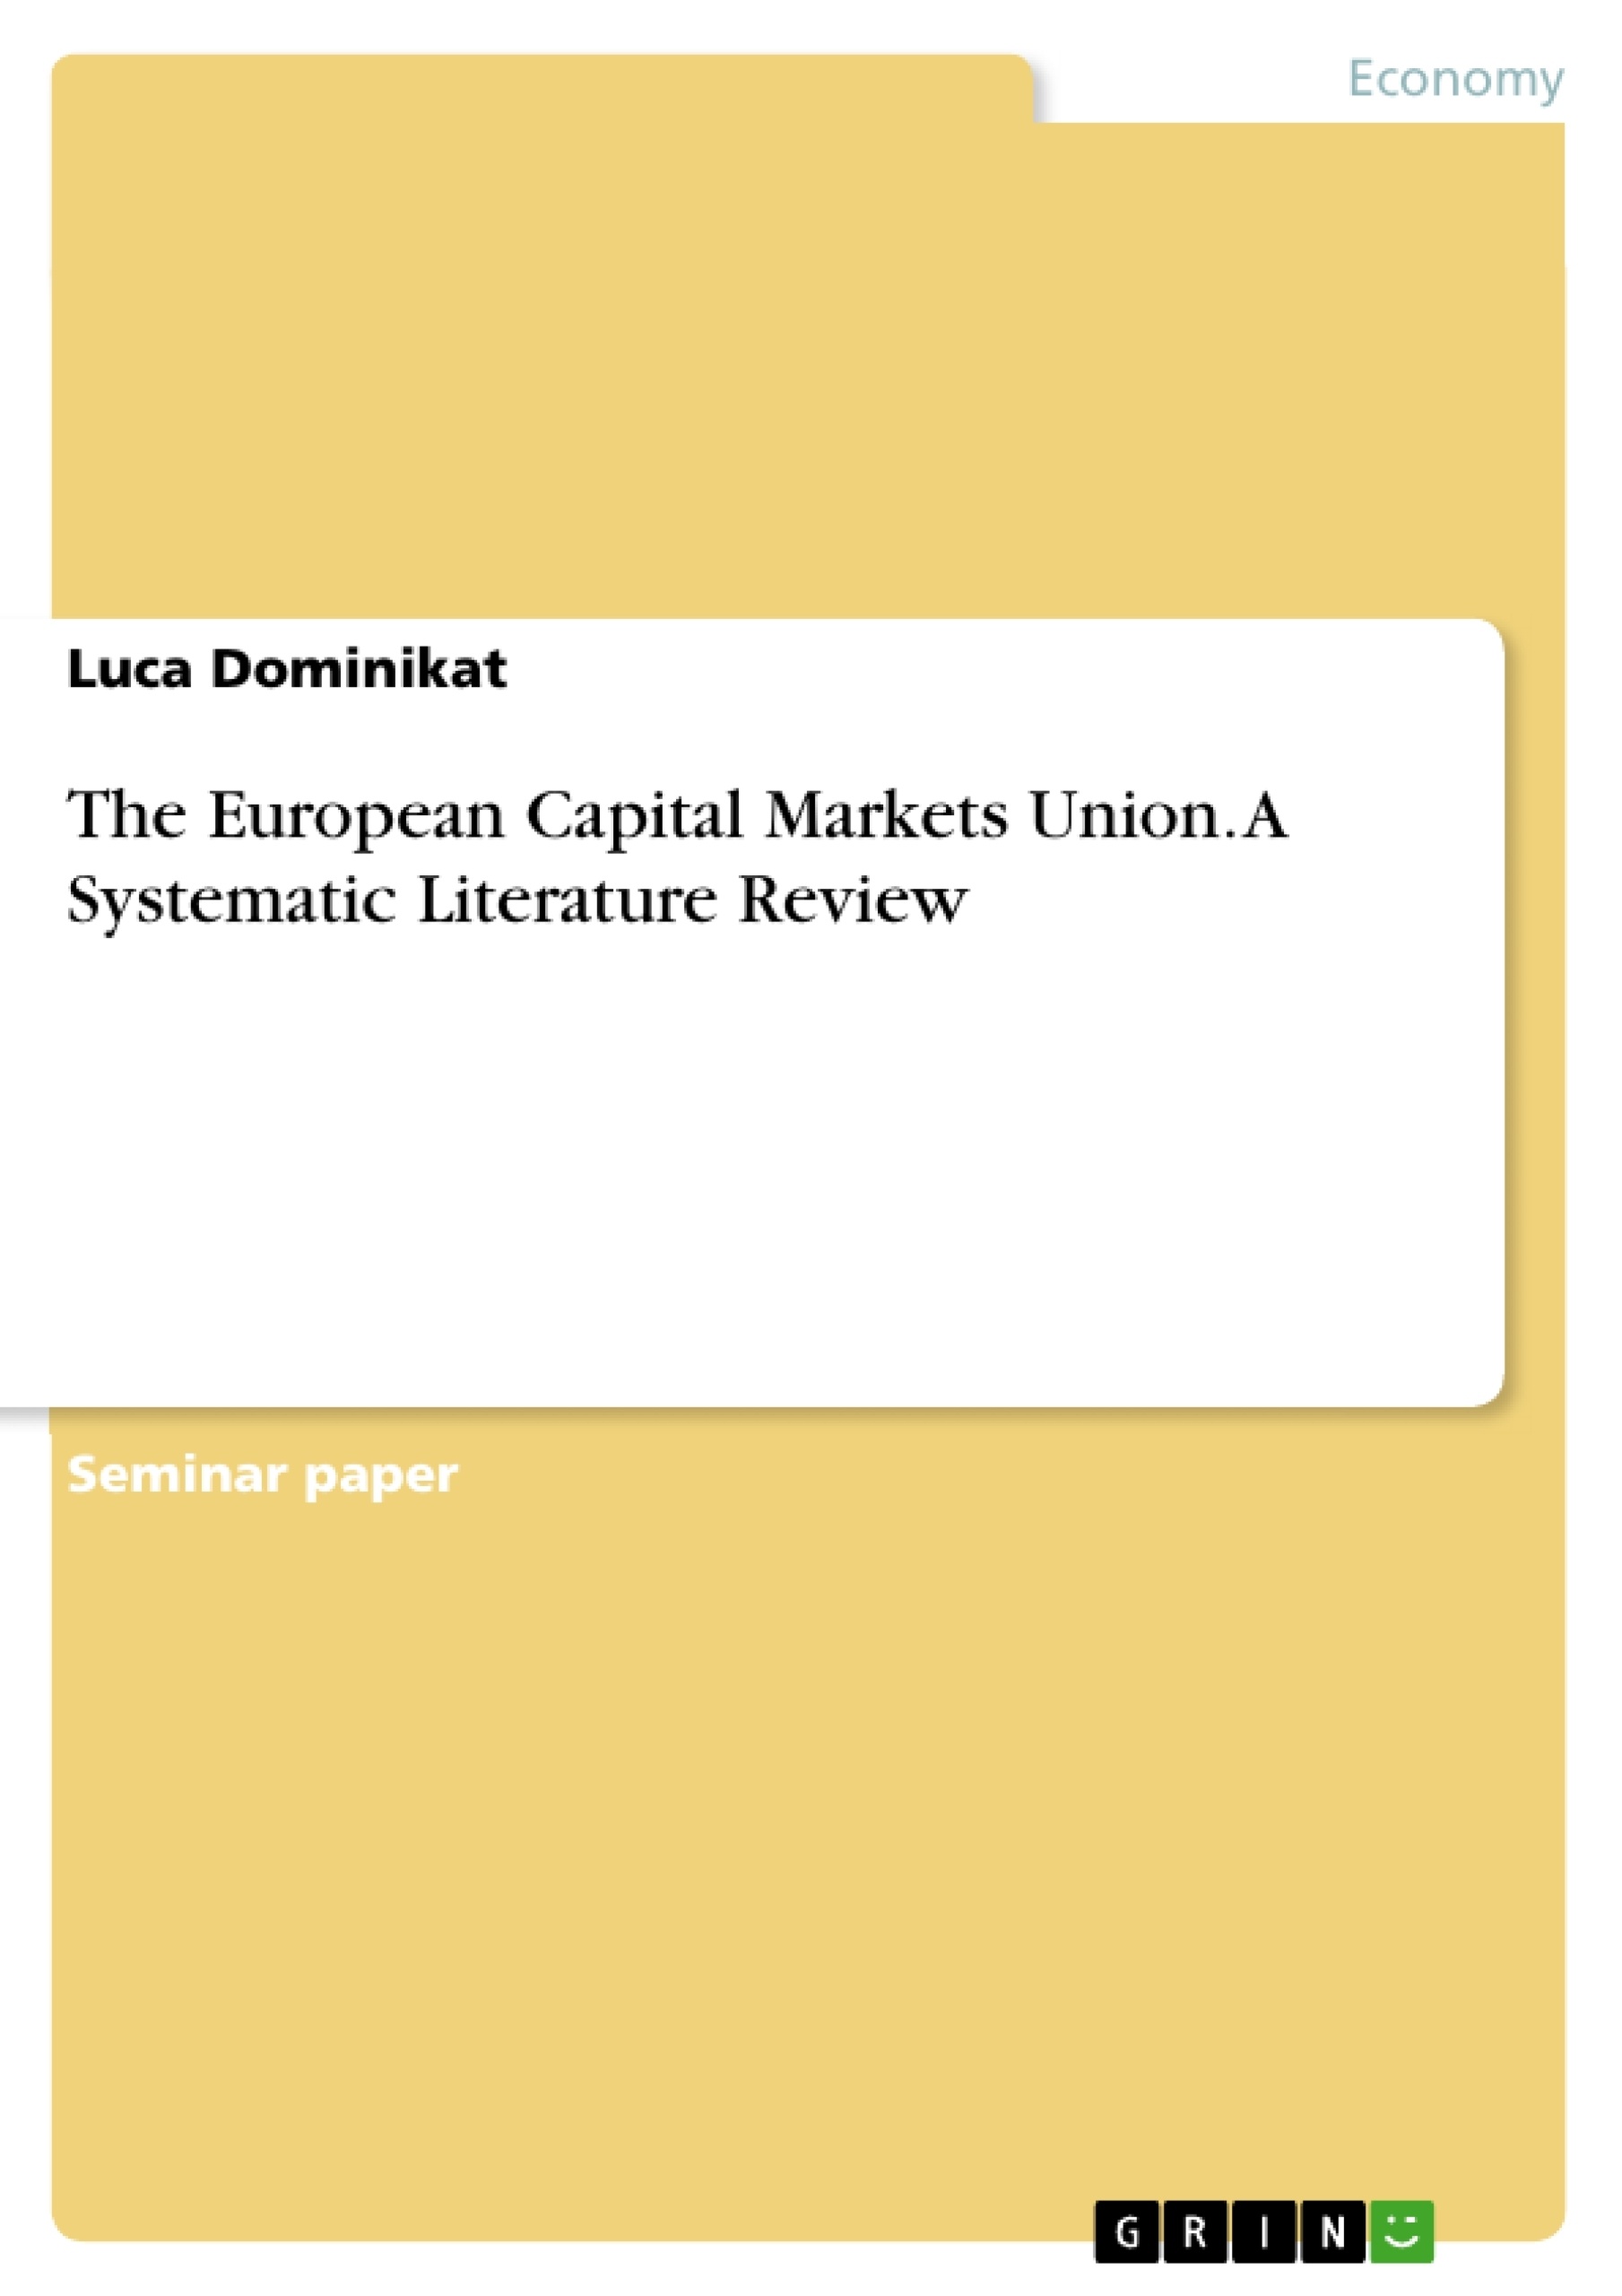 Título: The European Capital Markets Union. A Systematic Literature Review